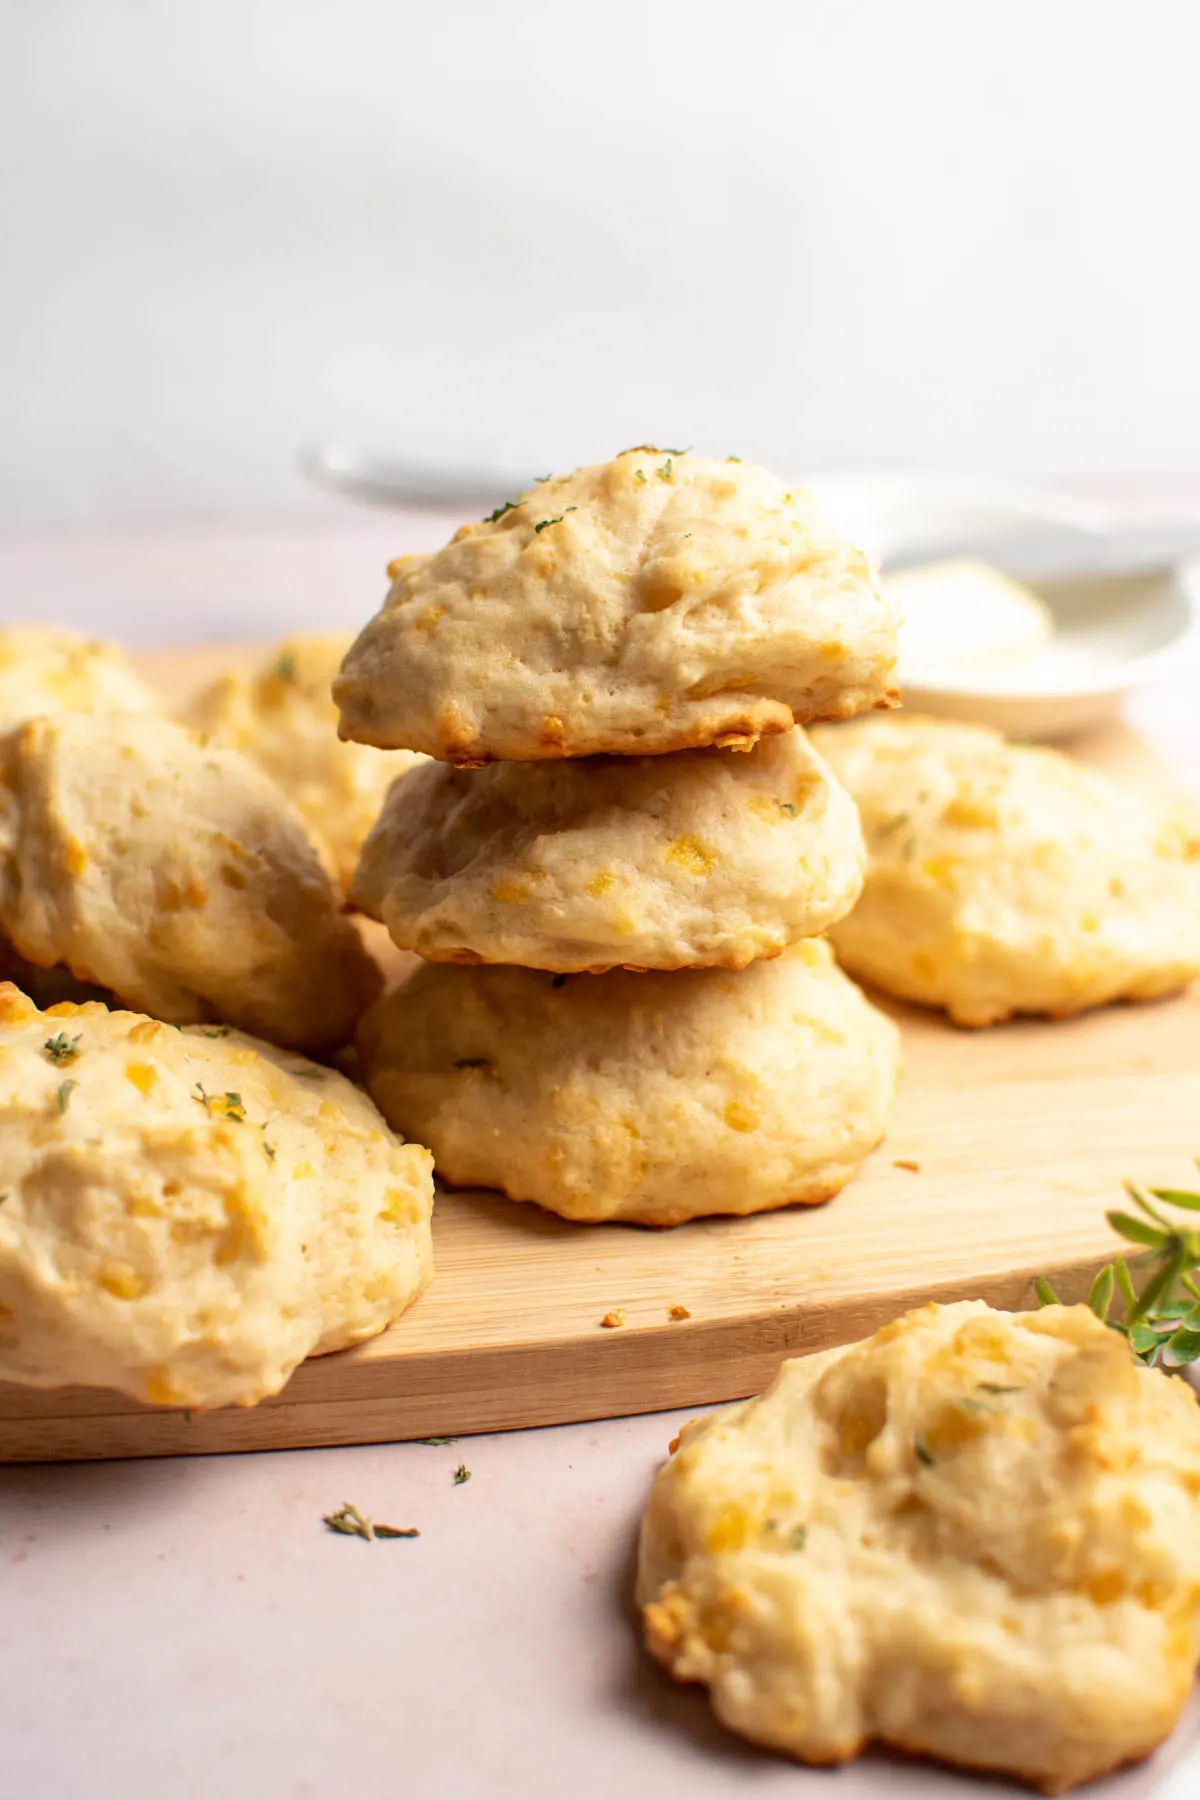 Stack of three parmesan cheese biscuits on wood cutting board with more biscuits surrounding.